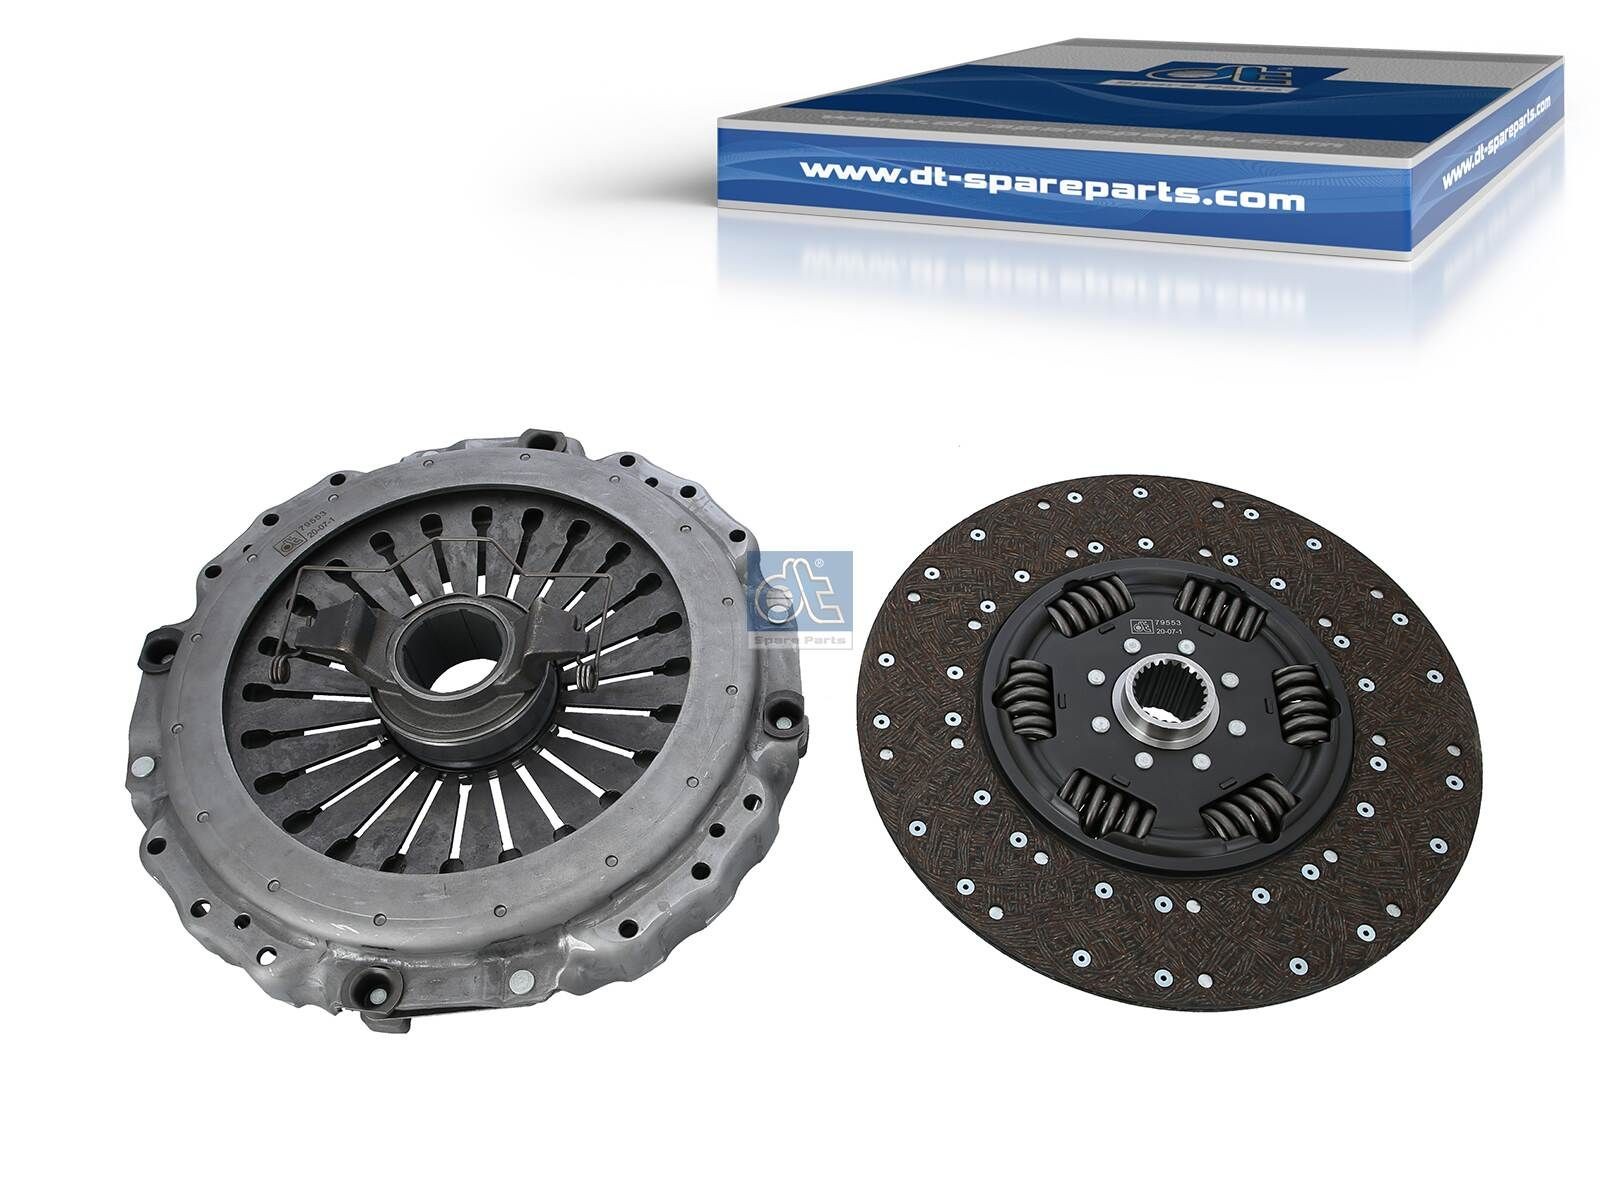 Clutch replacement kit DT Spare Parts 430mm - 2.97032